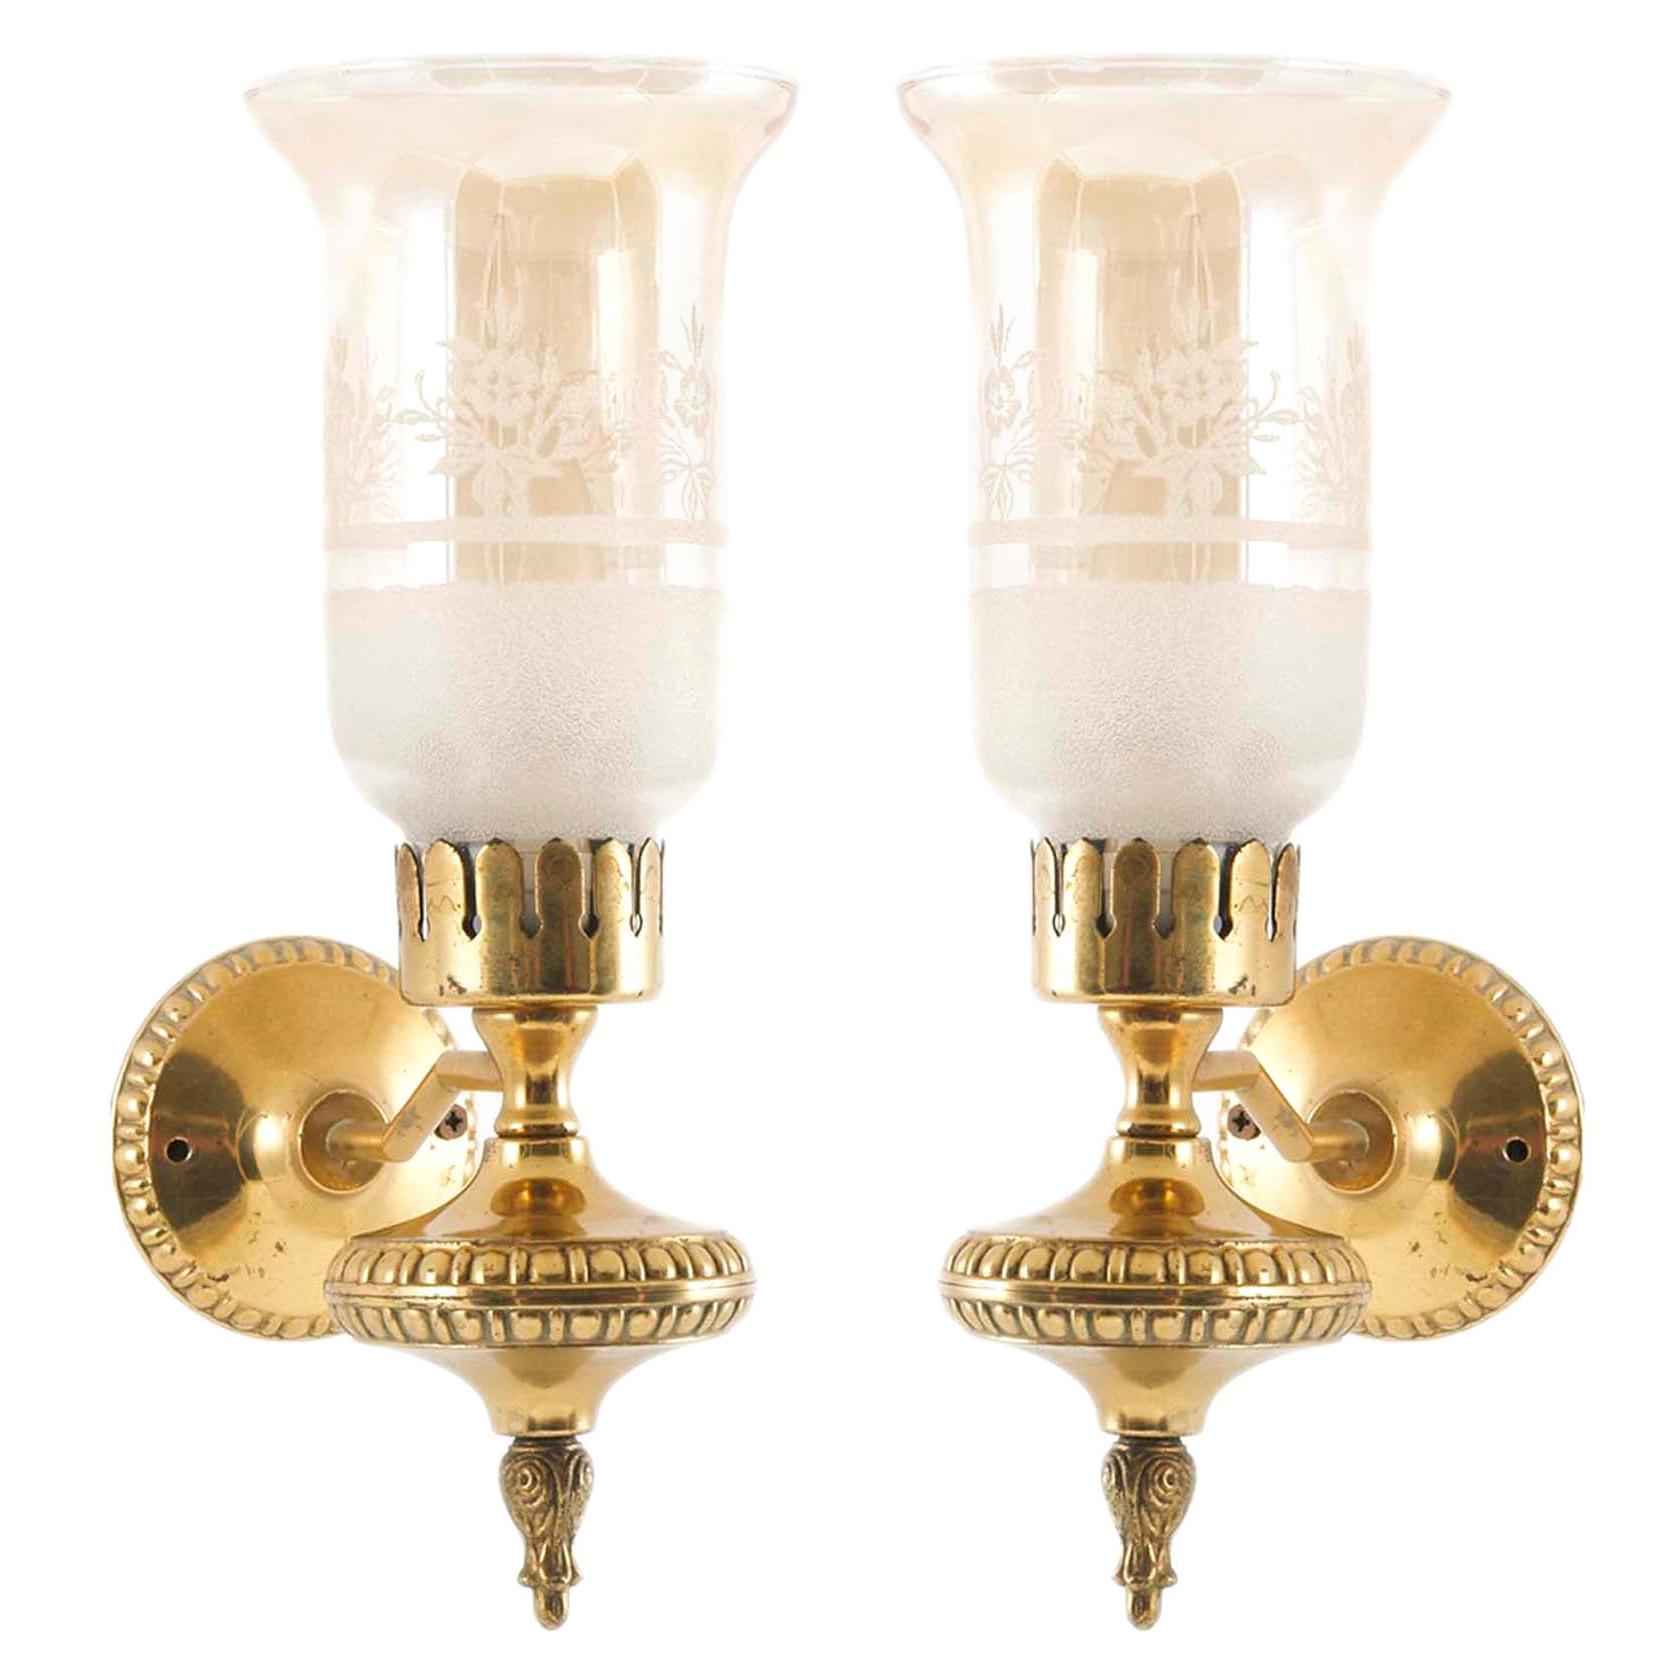 Florence 1930s Art Deco Wall Sconces Attributed to Bruno Chiarini, Murano Glass